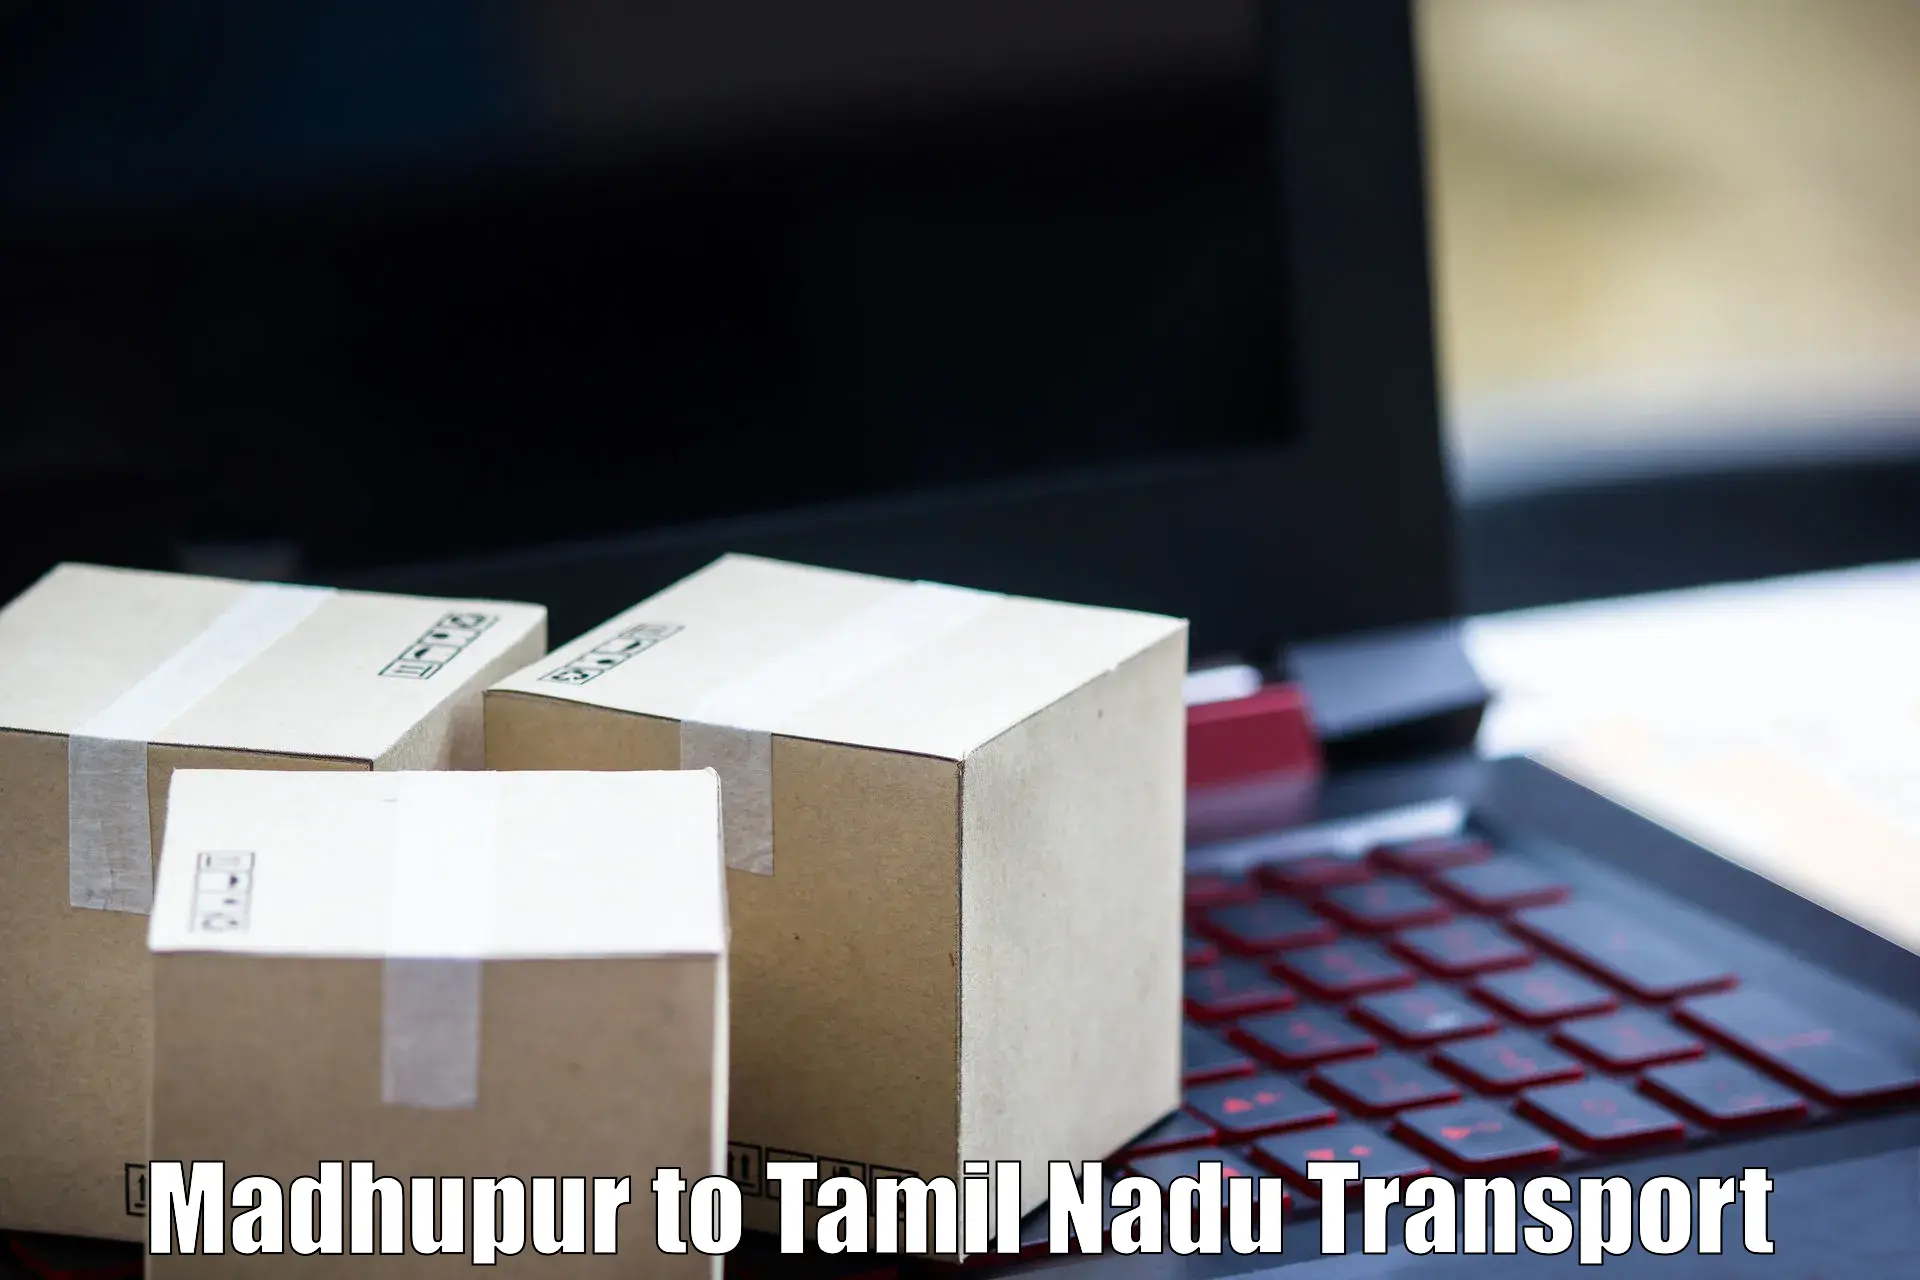 Road transport online services Madhupur to Shanmugha Arts Science Technology and Research Academy Thanjavur